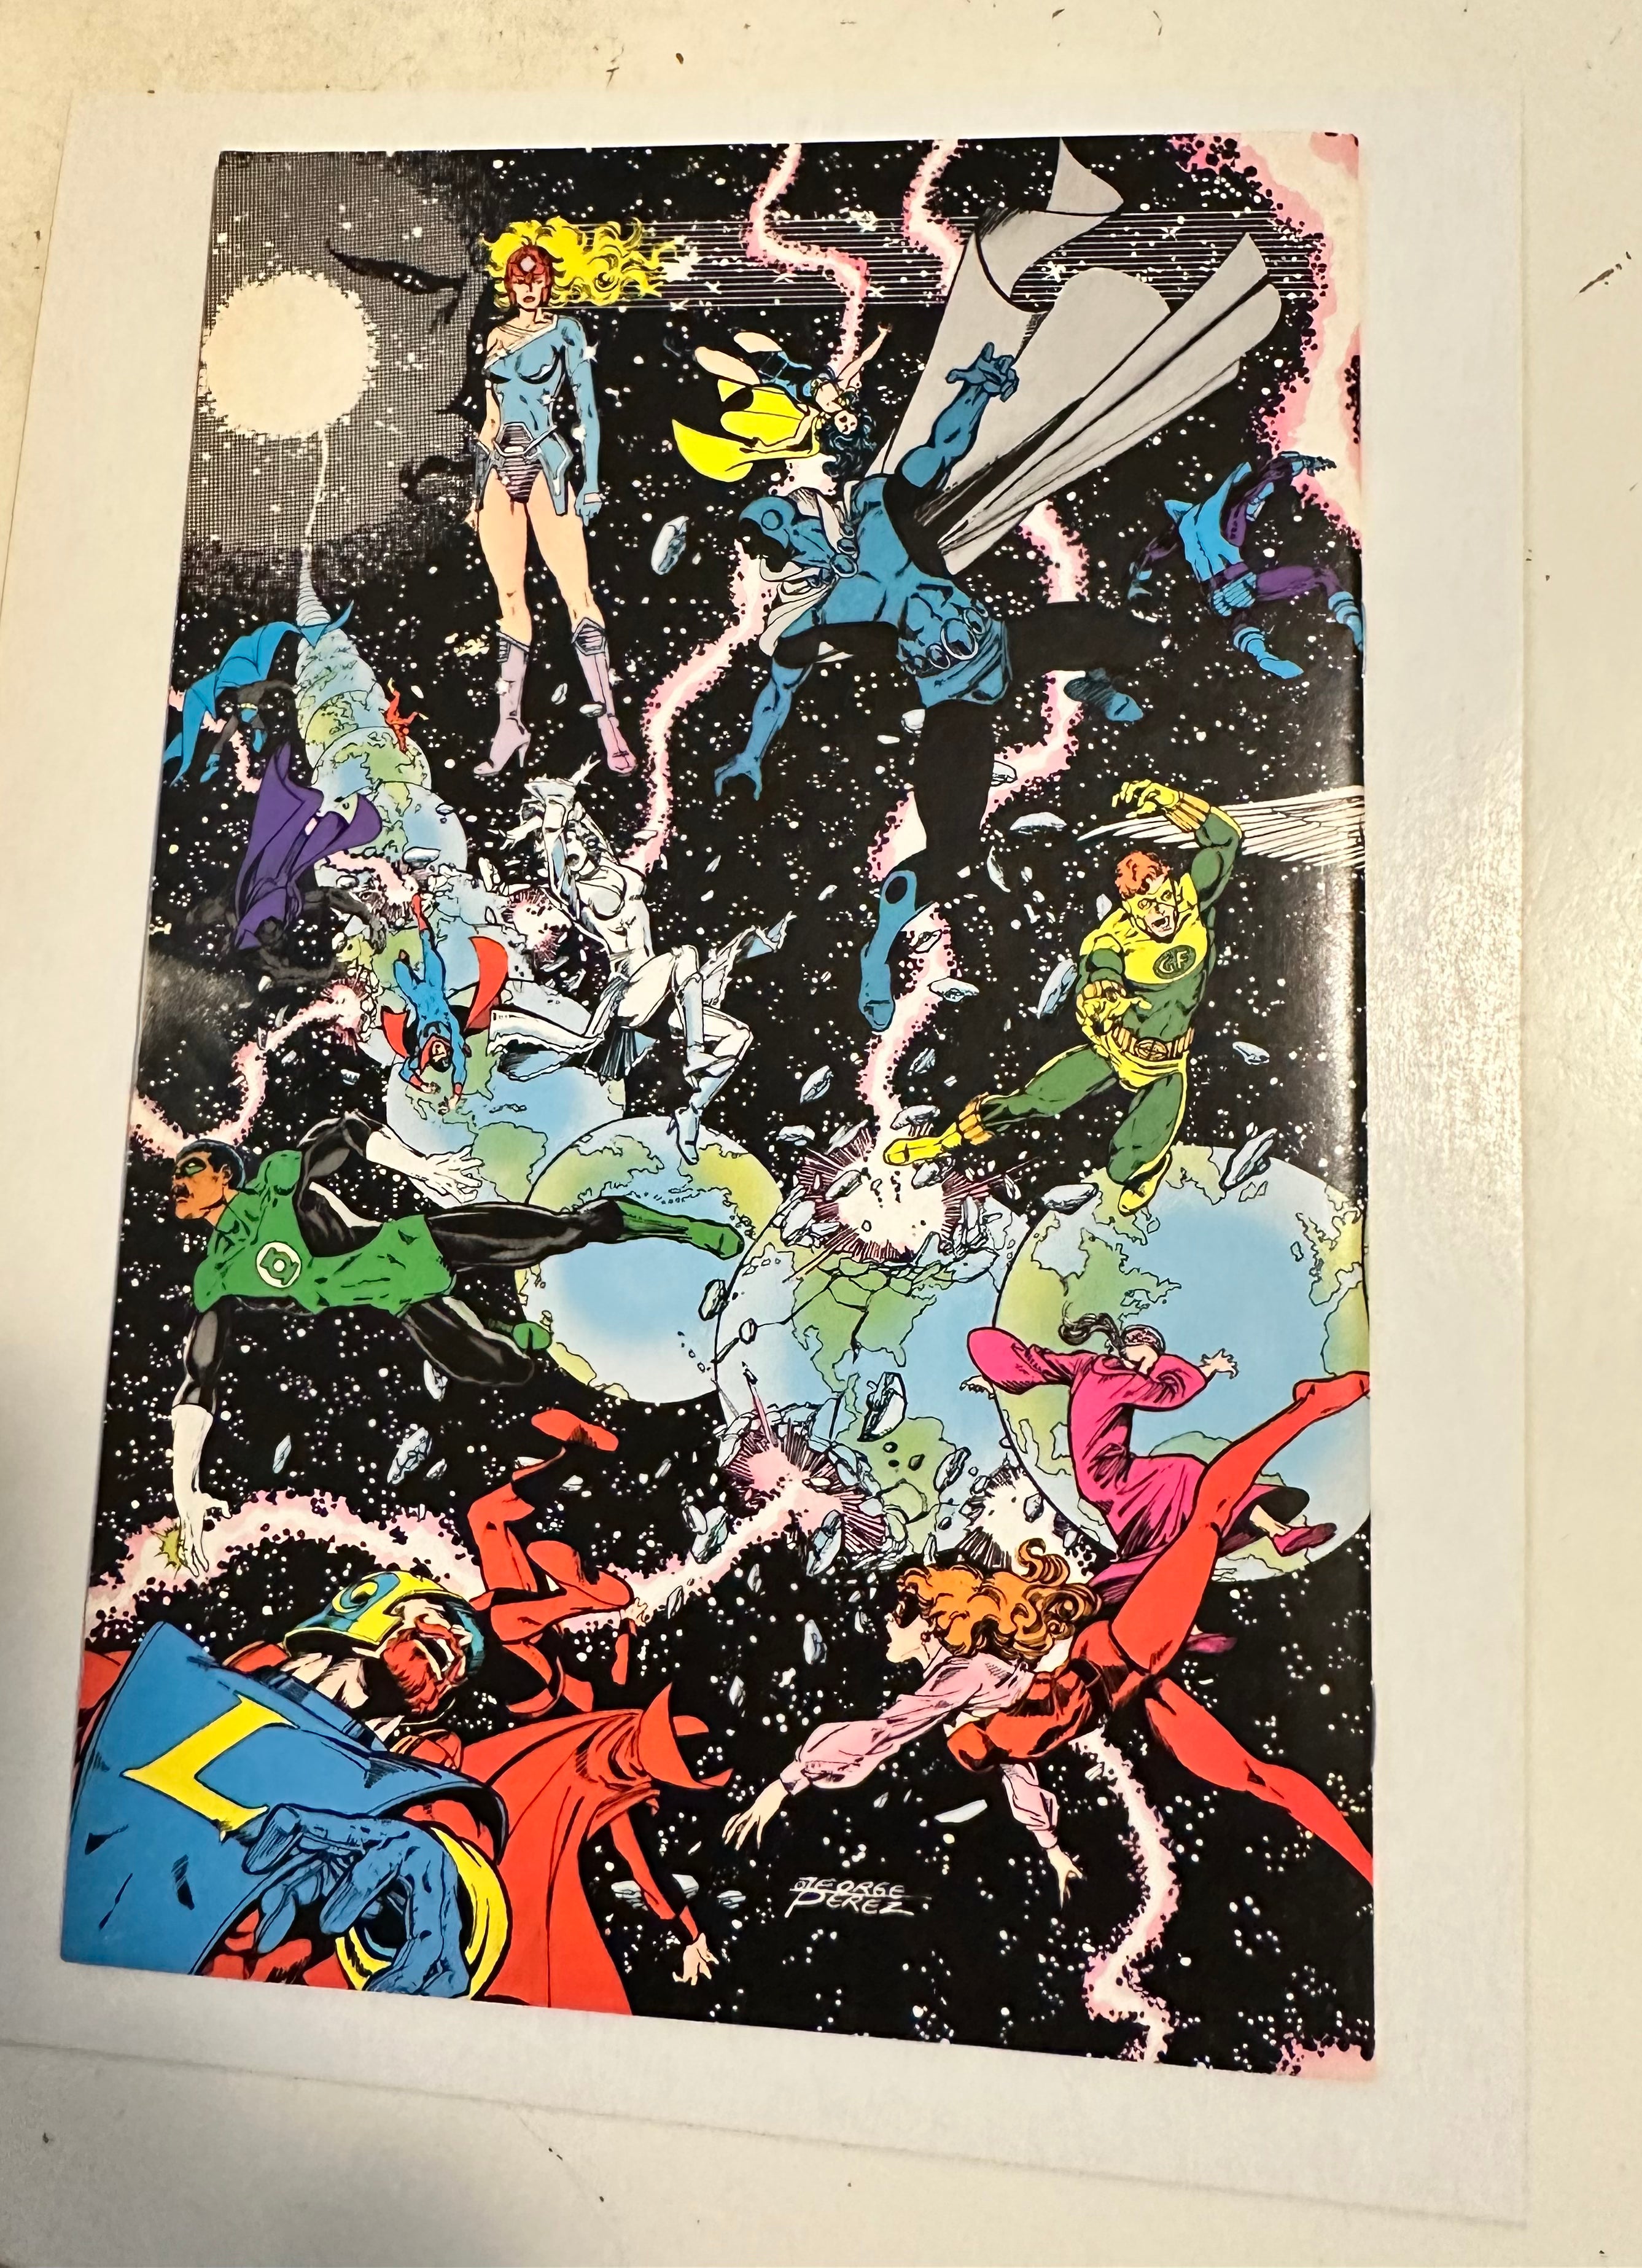 Crisis on infinite earth, number one rare first issue, 1985